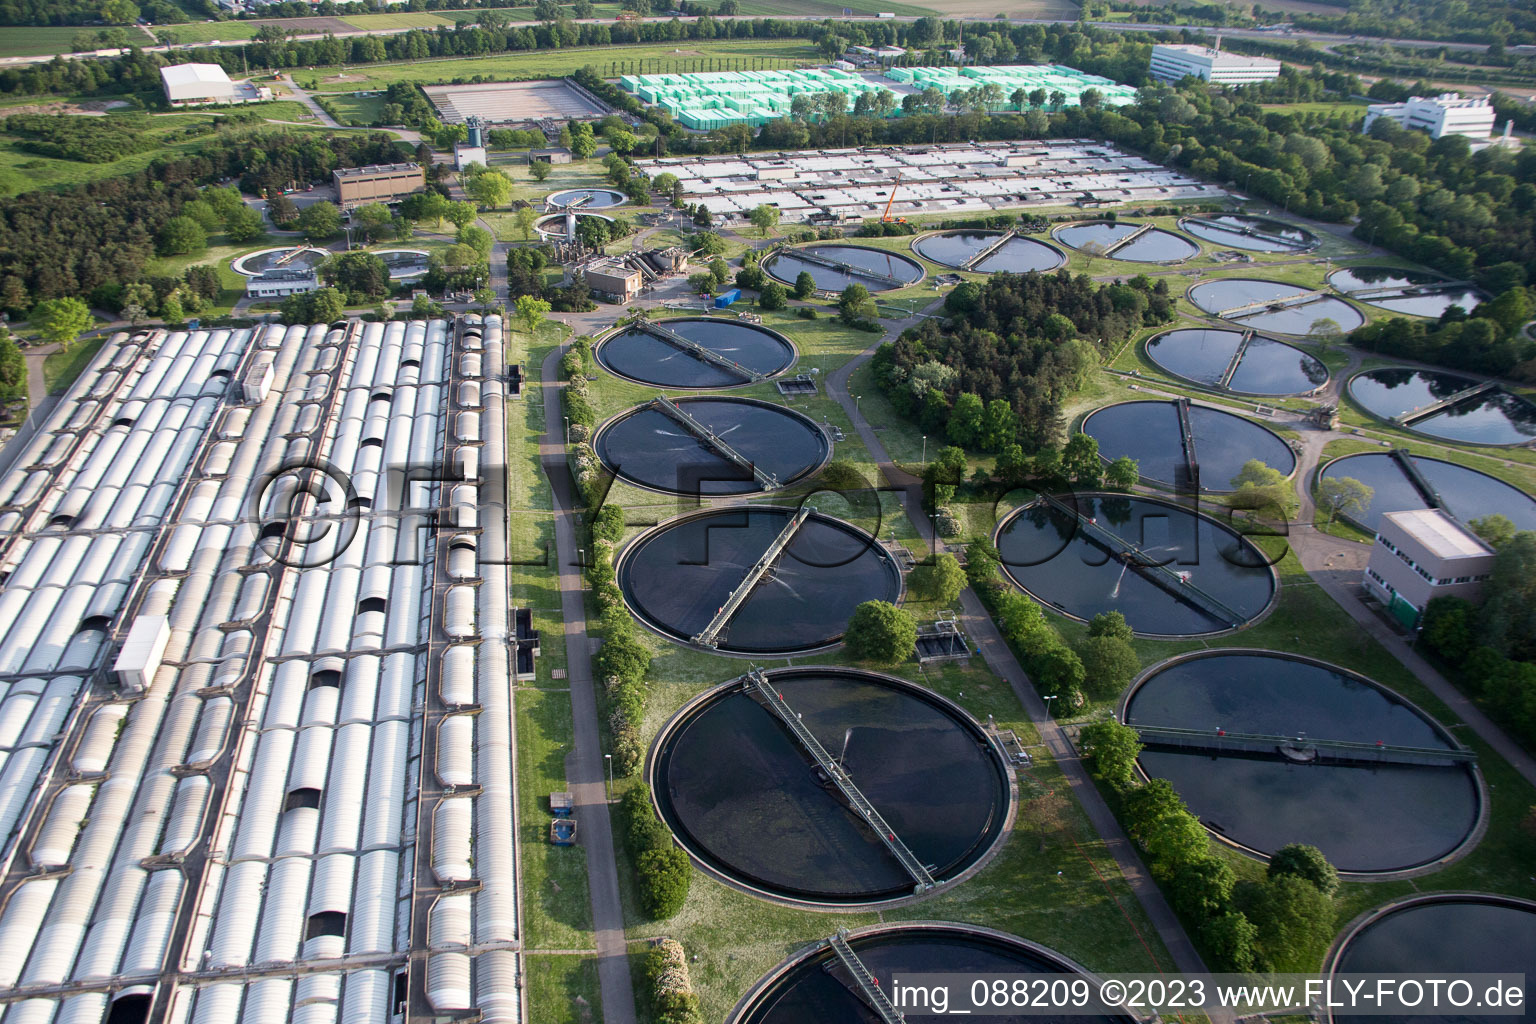 Oblique view of BASF sewage treatment plant in the district Mörsch in Frankenthal in the state Rhineland-Palatinate, Germany